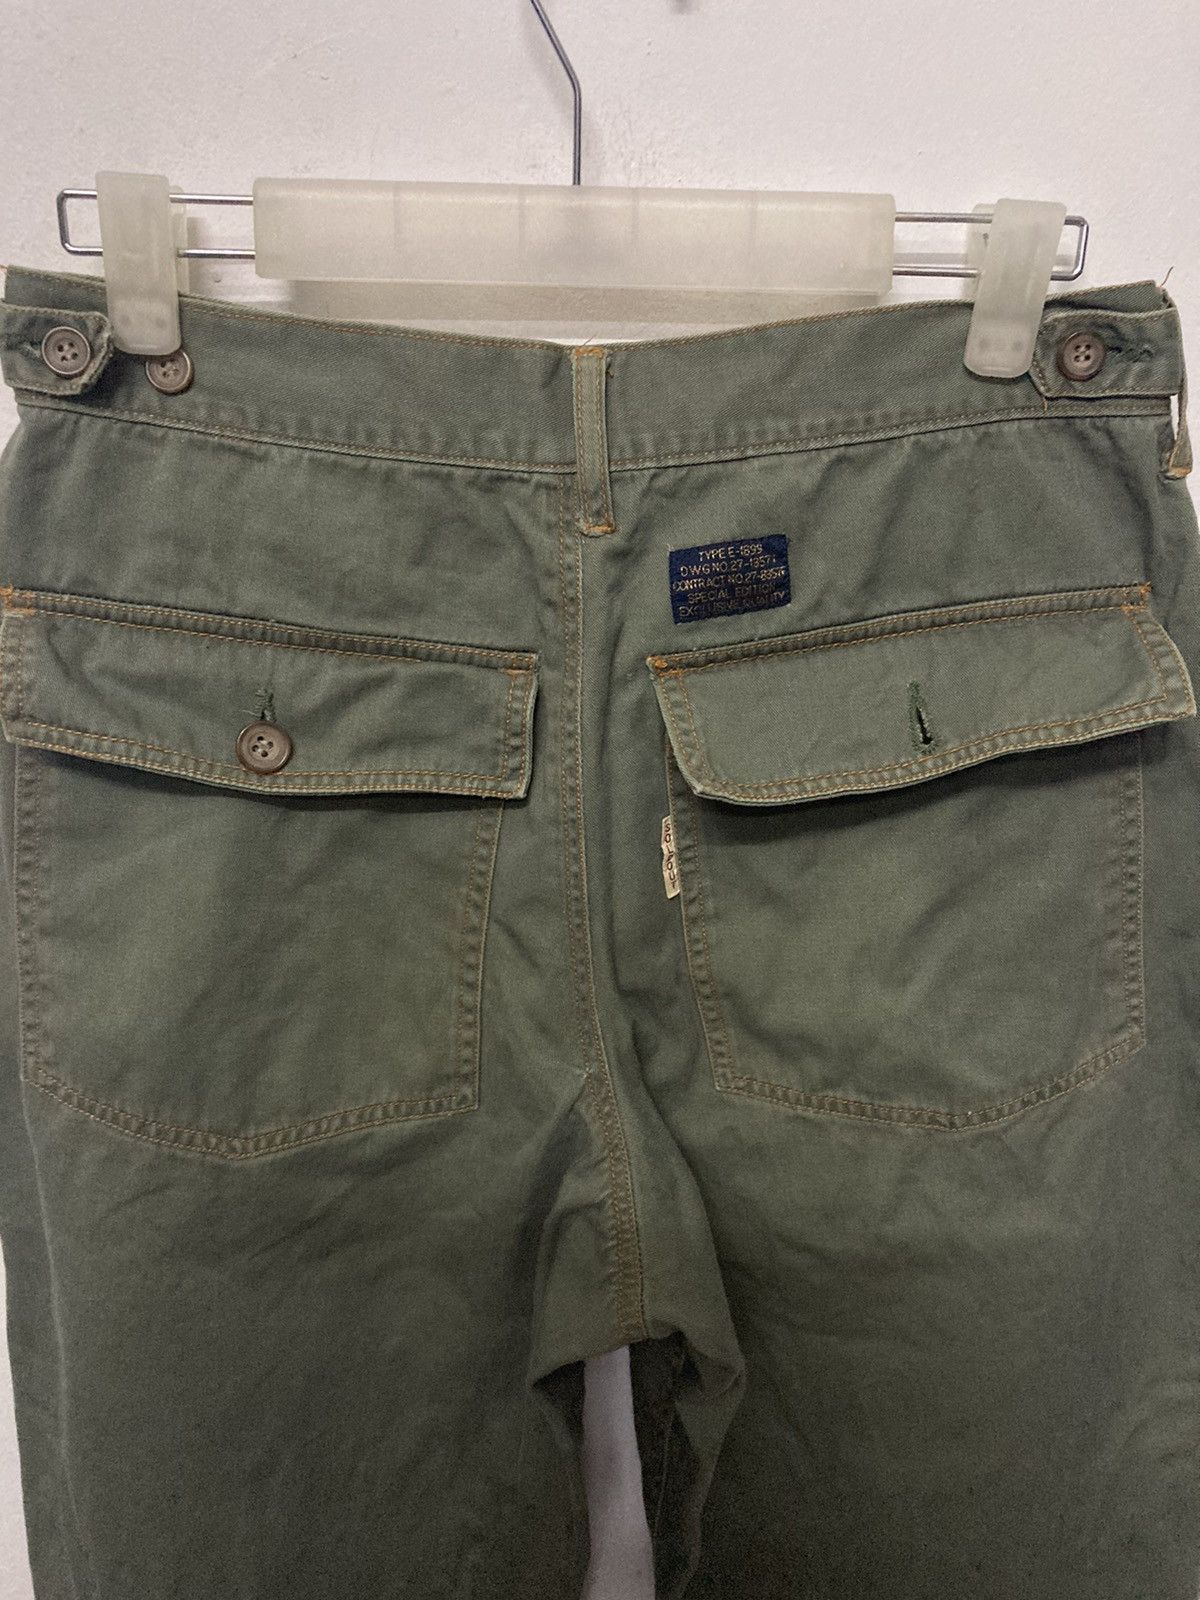 Vintage Soldout Japanese Brand Large Pocket Army Style Pants - 10